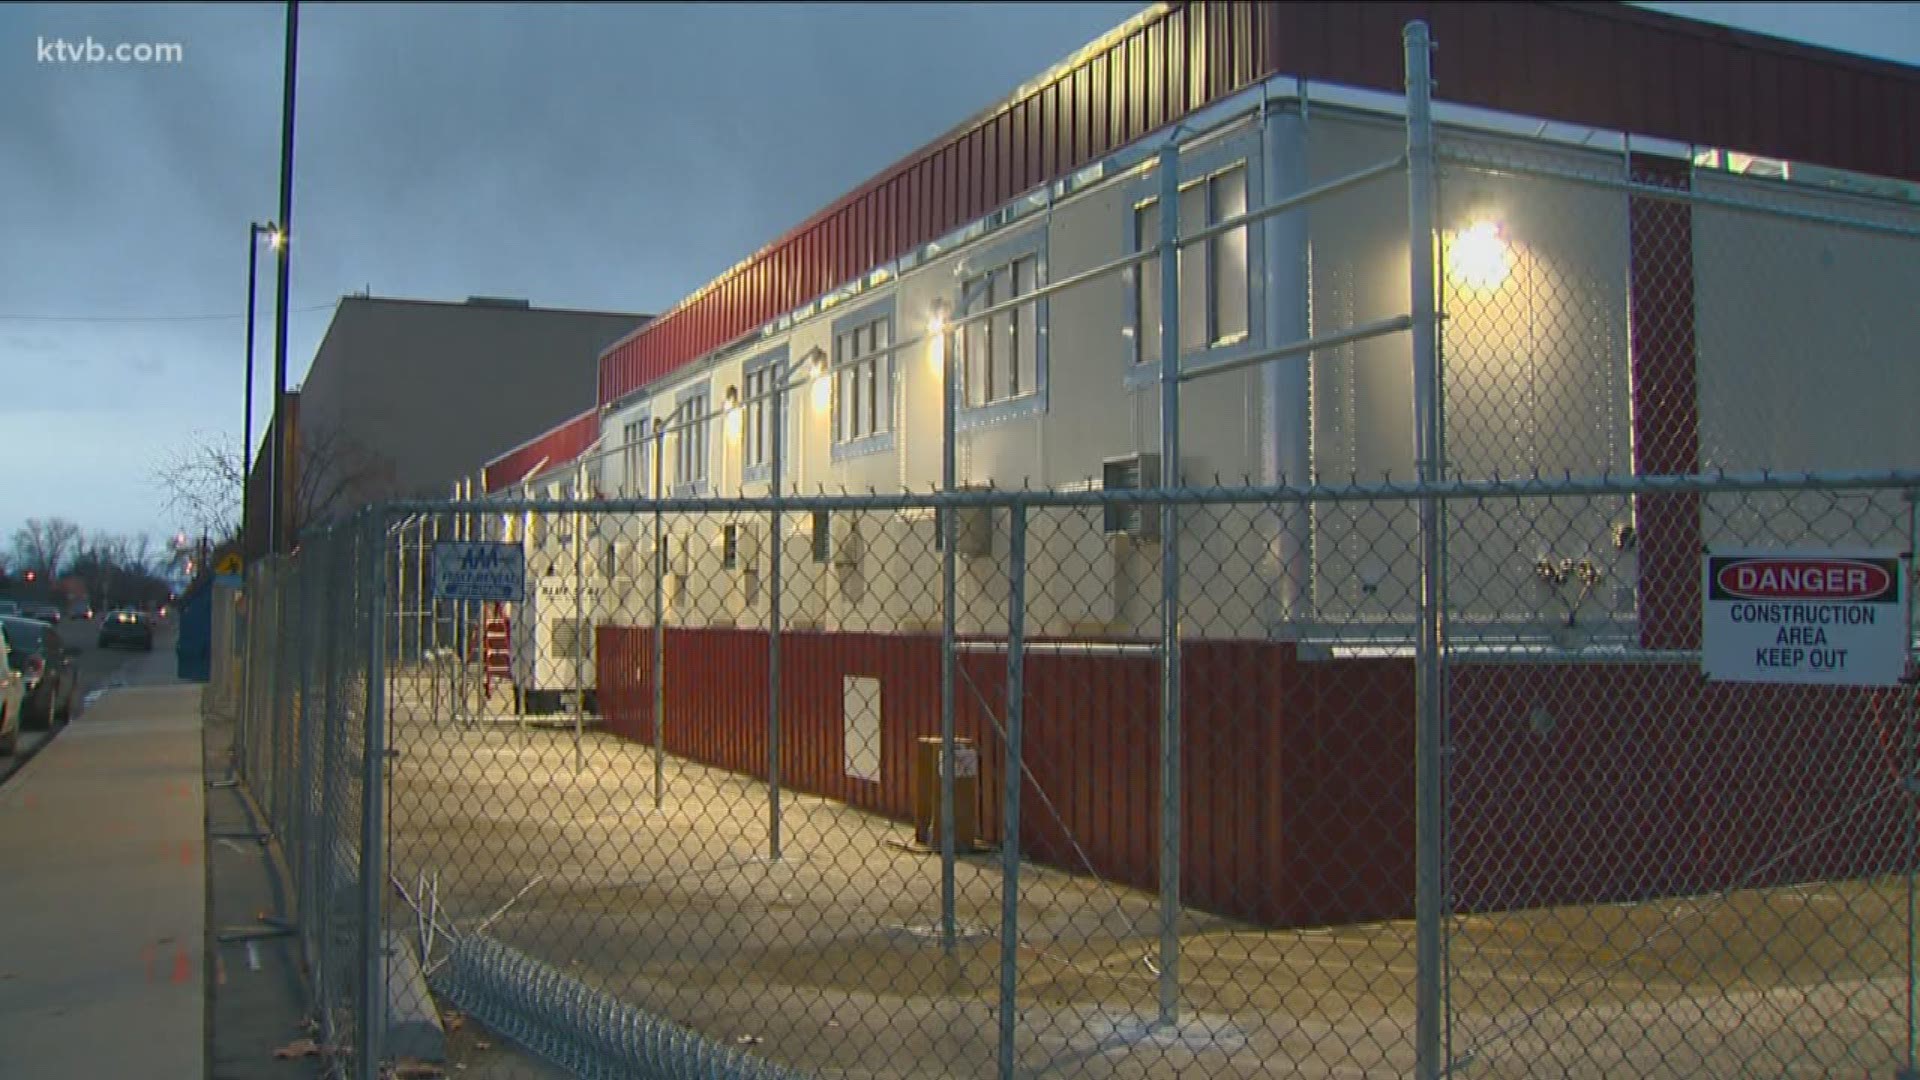 The new pod is a temporary facility for female inmates that officials hope will ease chronic overcrowding in the jail.